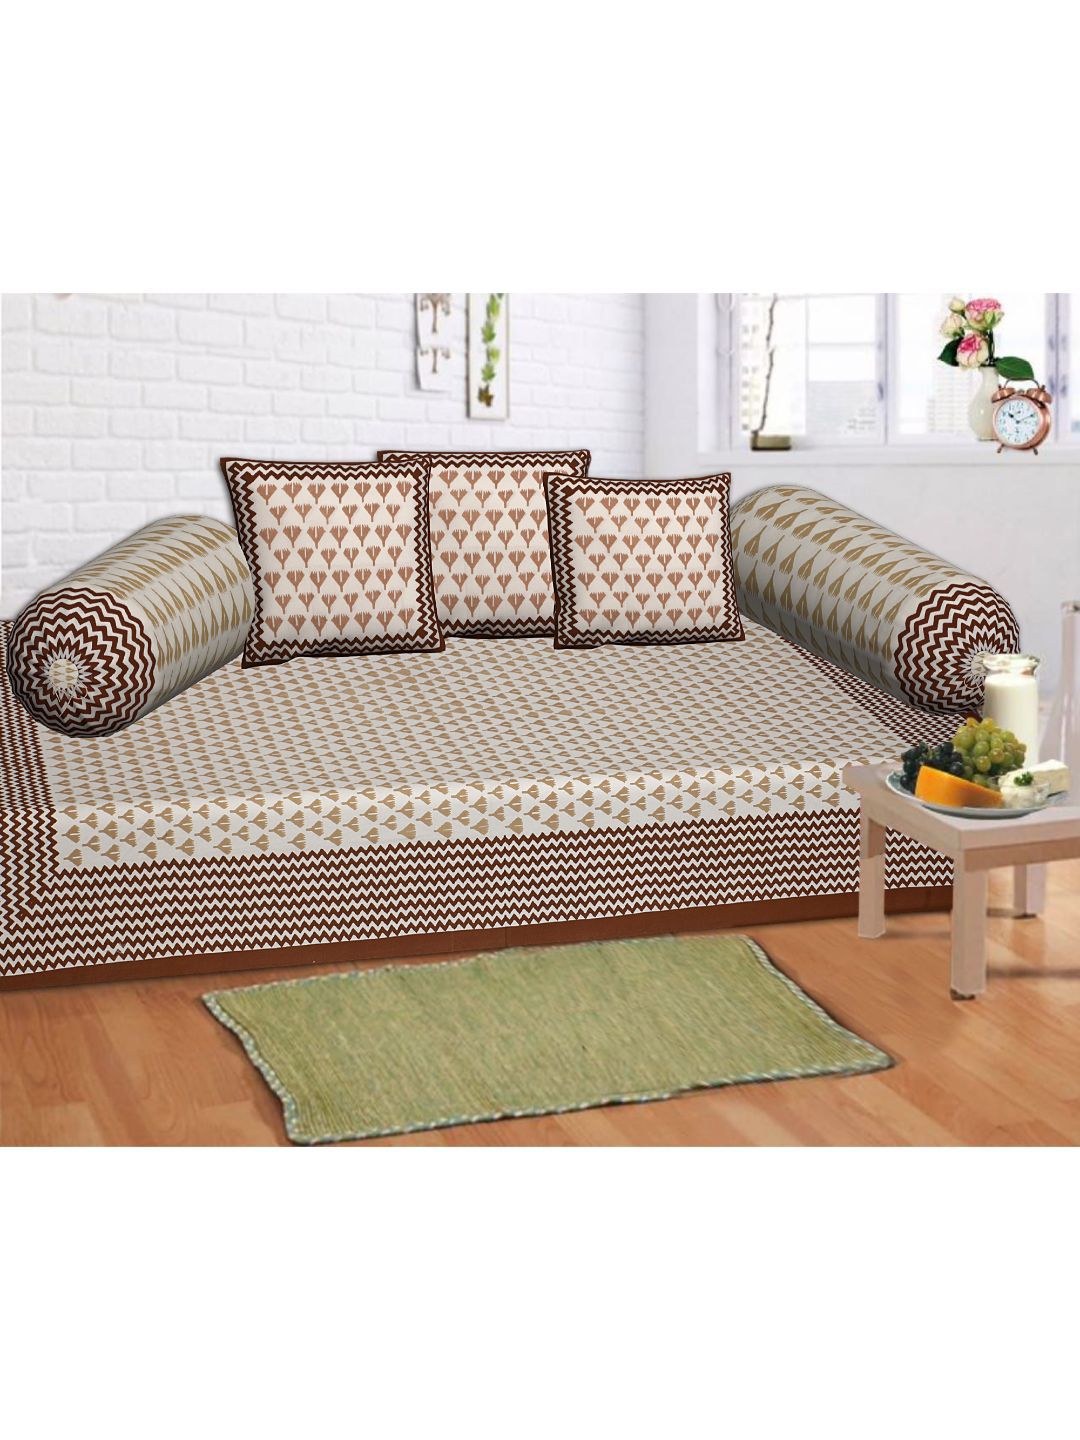 INDHOME LIFEn Brown 1bedsheet with 3 Cushions Covers & 2 Bolster Covers Cotton Diwan Set Price in India